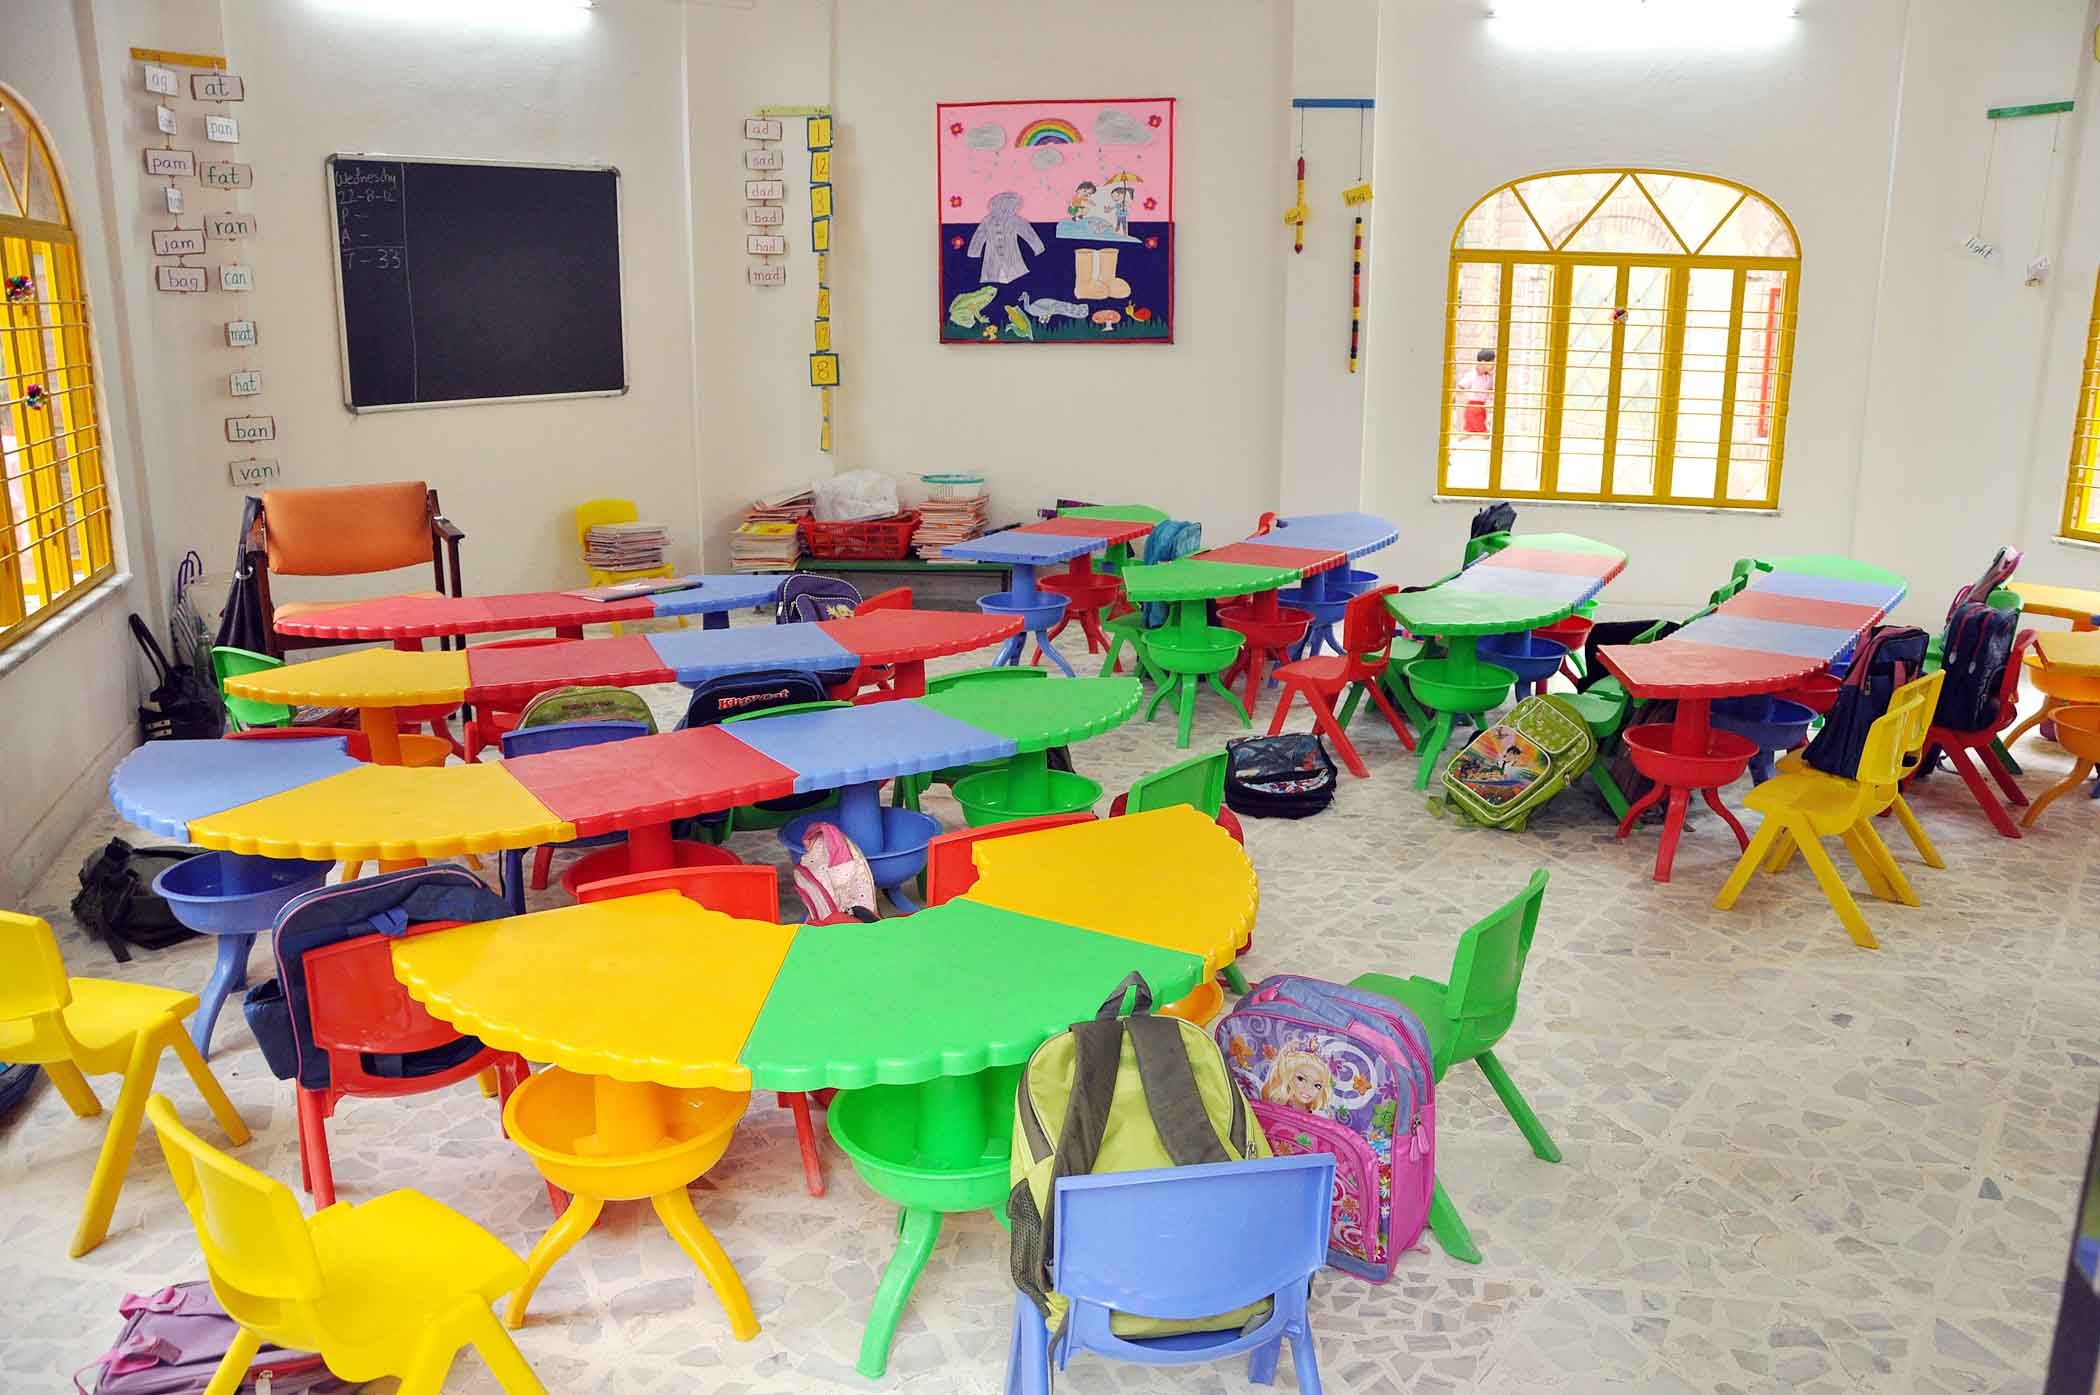 Contemporary Kids Of Remarkable Contemporary Kids Class Room Of Interior Design School With Hodgepodge Tables And Chairs In Colorful Also Furnished With Chalkboard Interior Design 15 Captivating Interior Design Schools With Vibrant And Colorful Interiors